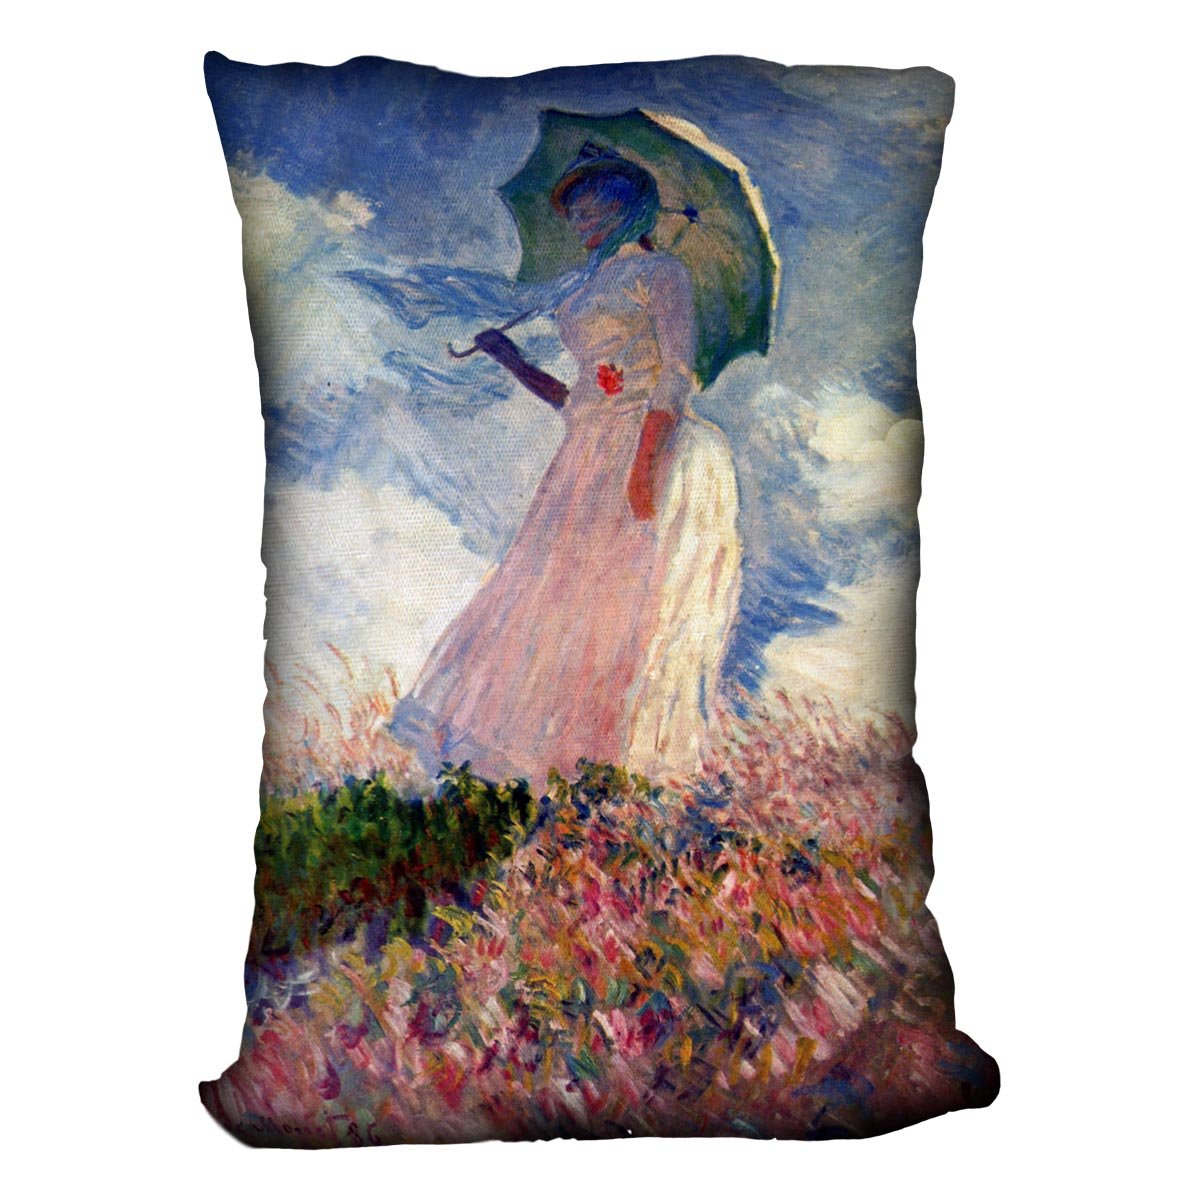 Woman with Parasol study by Monet Throw Pillow